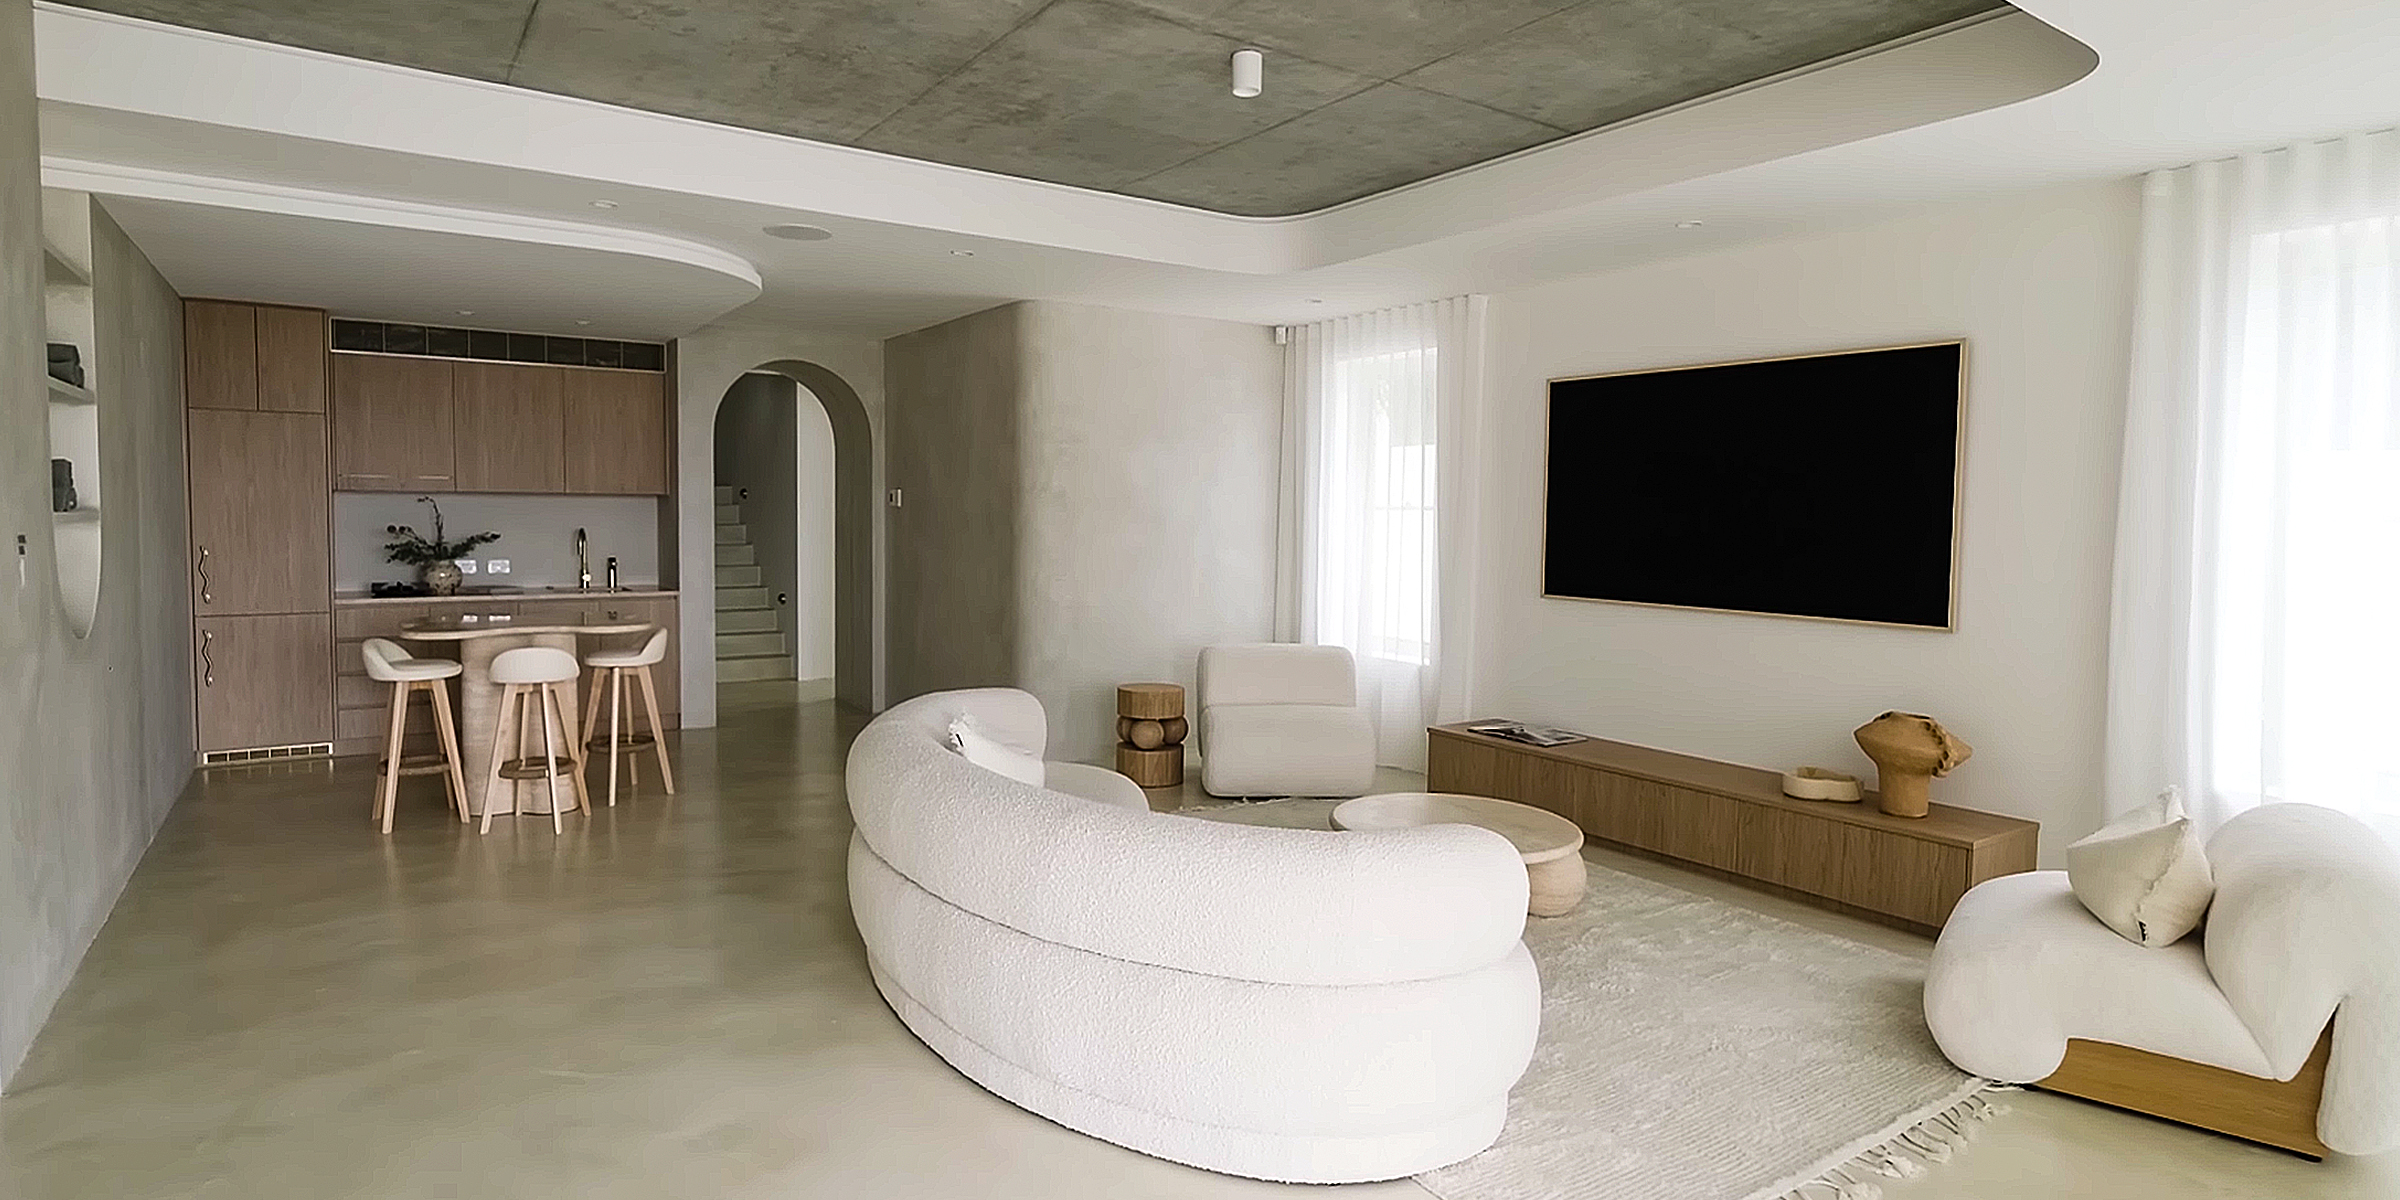 A Greek-inspired residence | Source: YouTube/ABIInteriors